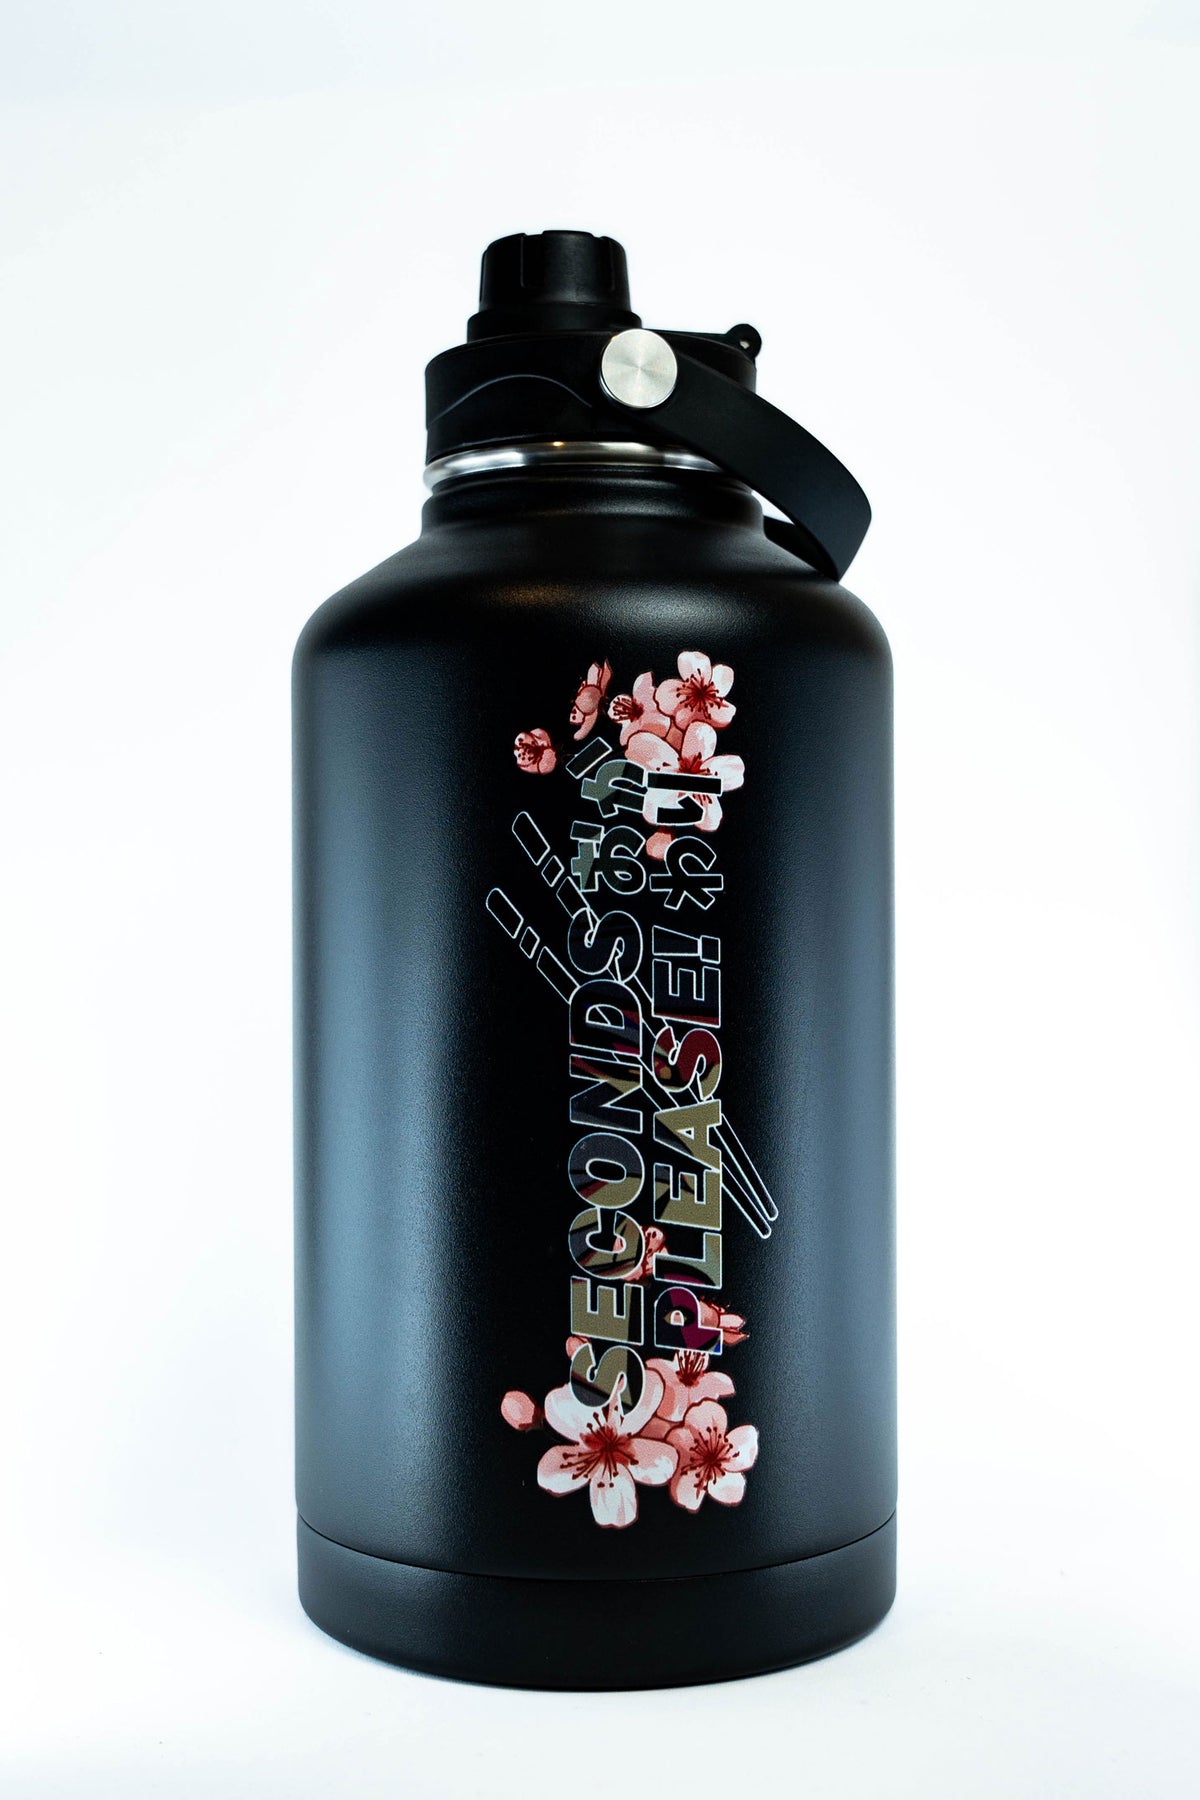 45NRTH Decade Water Bottle, Insulated Water Bottle